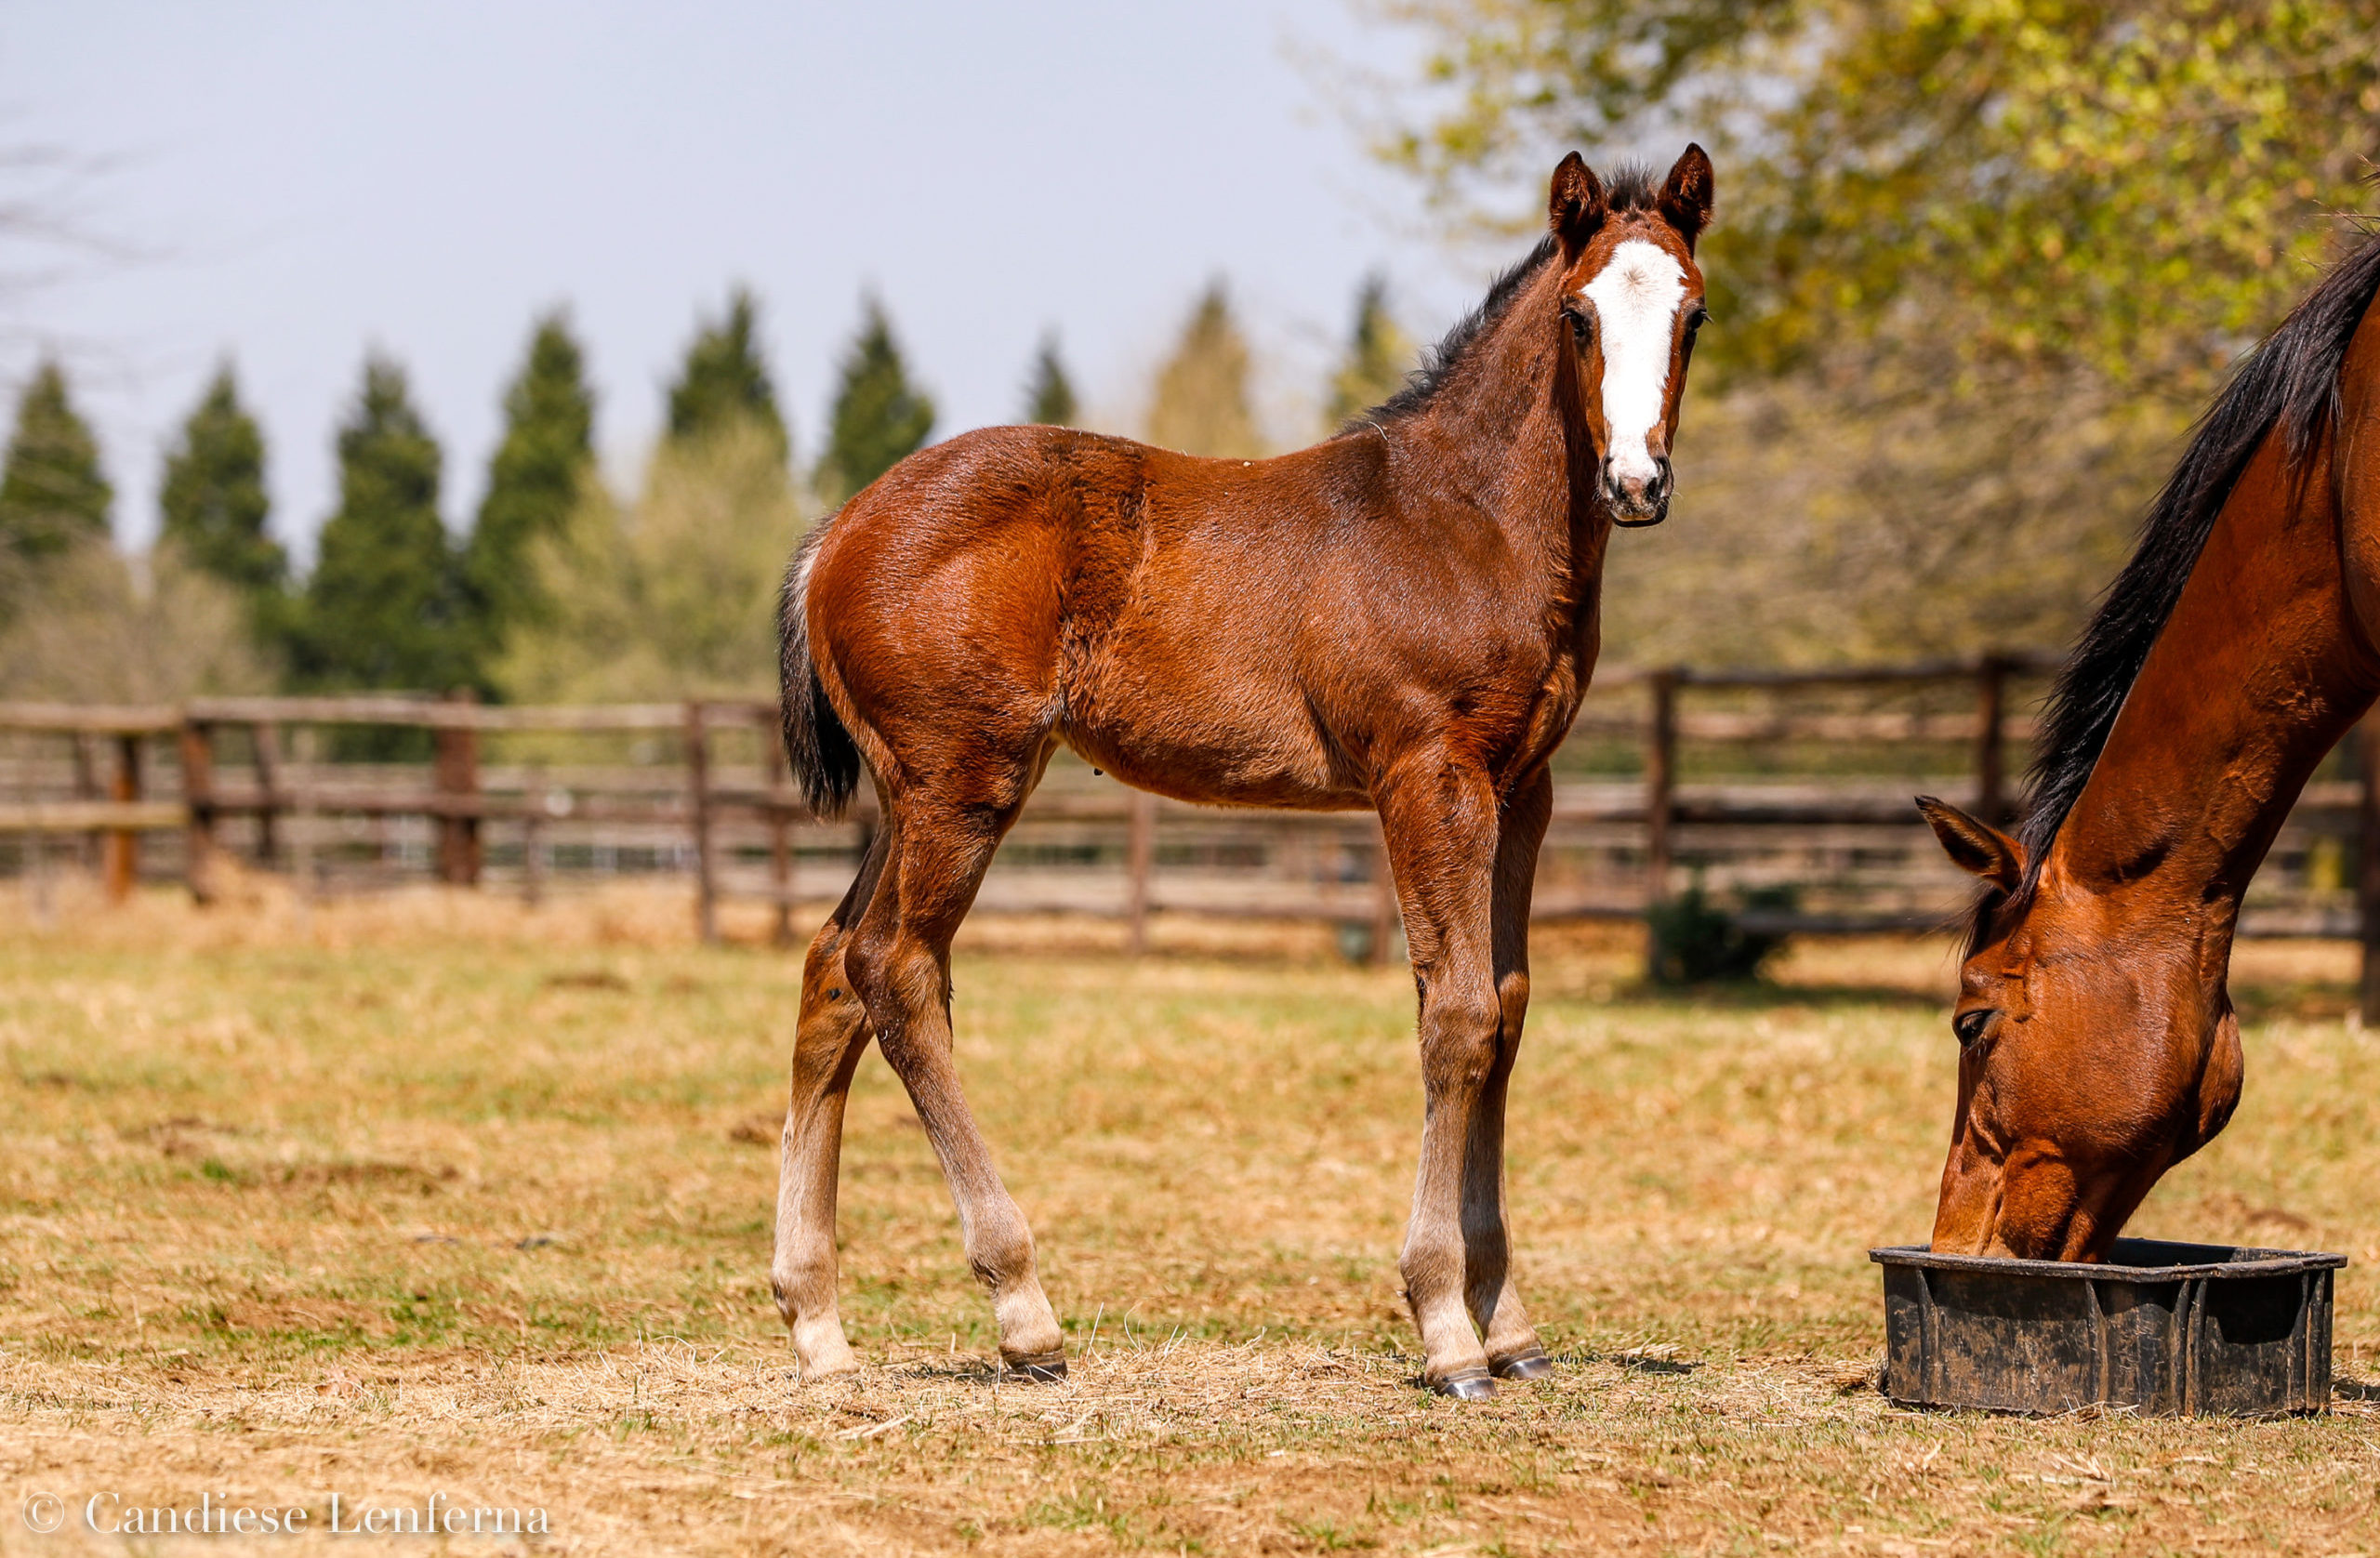 Blue Sky Thoroughbreds (f) Willow Magic x Cinnamon Spice – born 3 August (Pic- Candiese Lenferna)